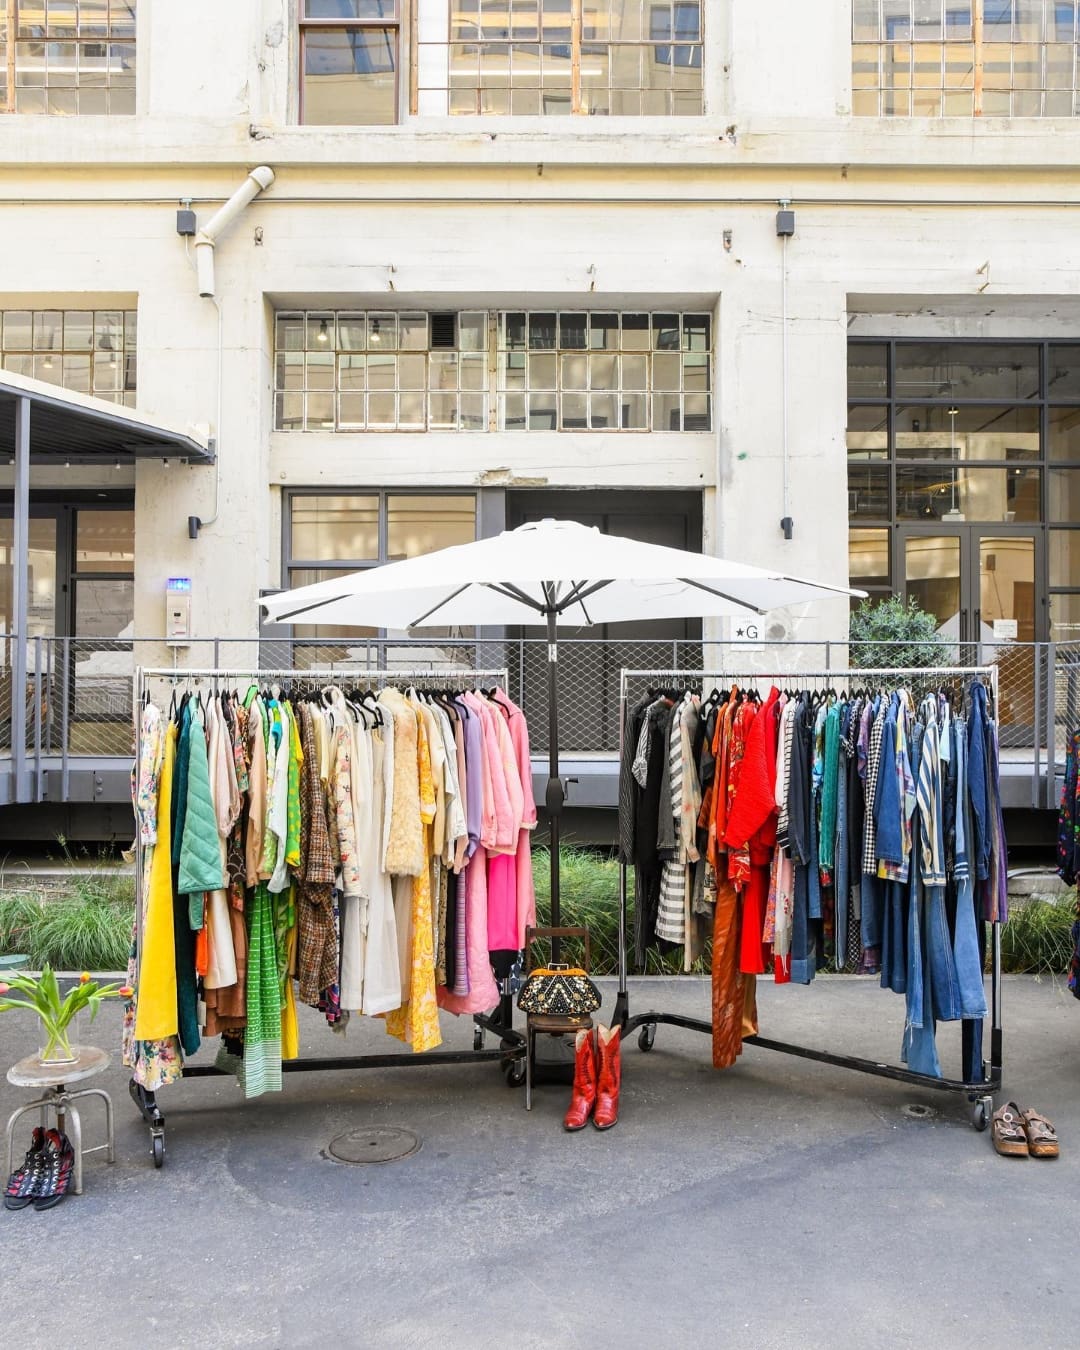 The best vintage stores and flea markets in LA